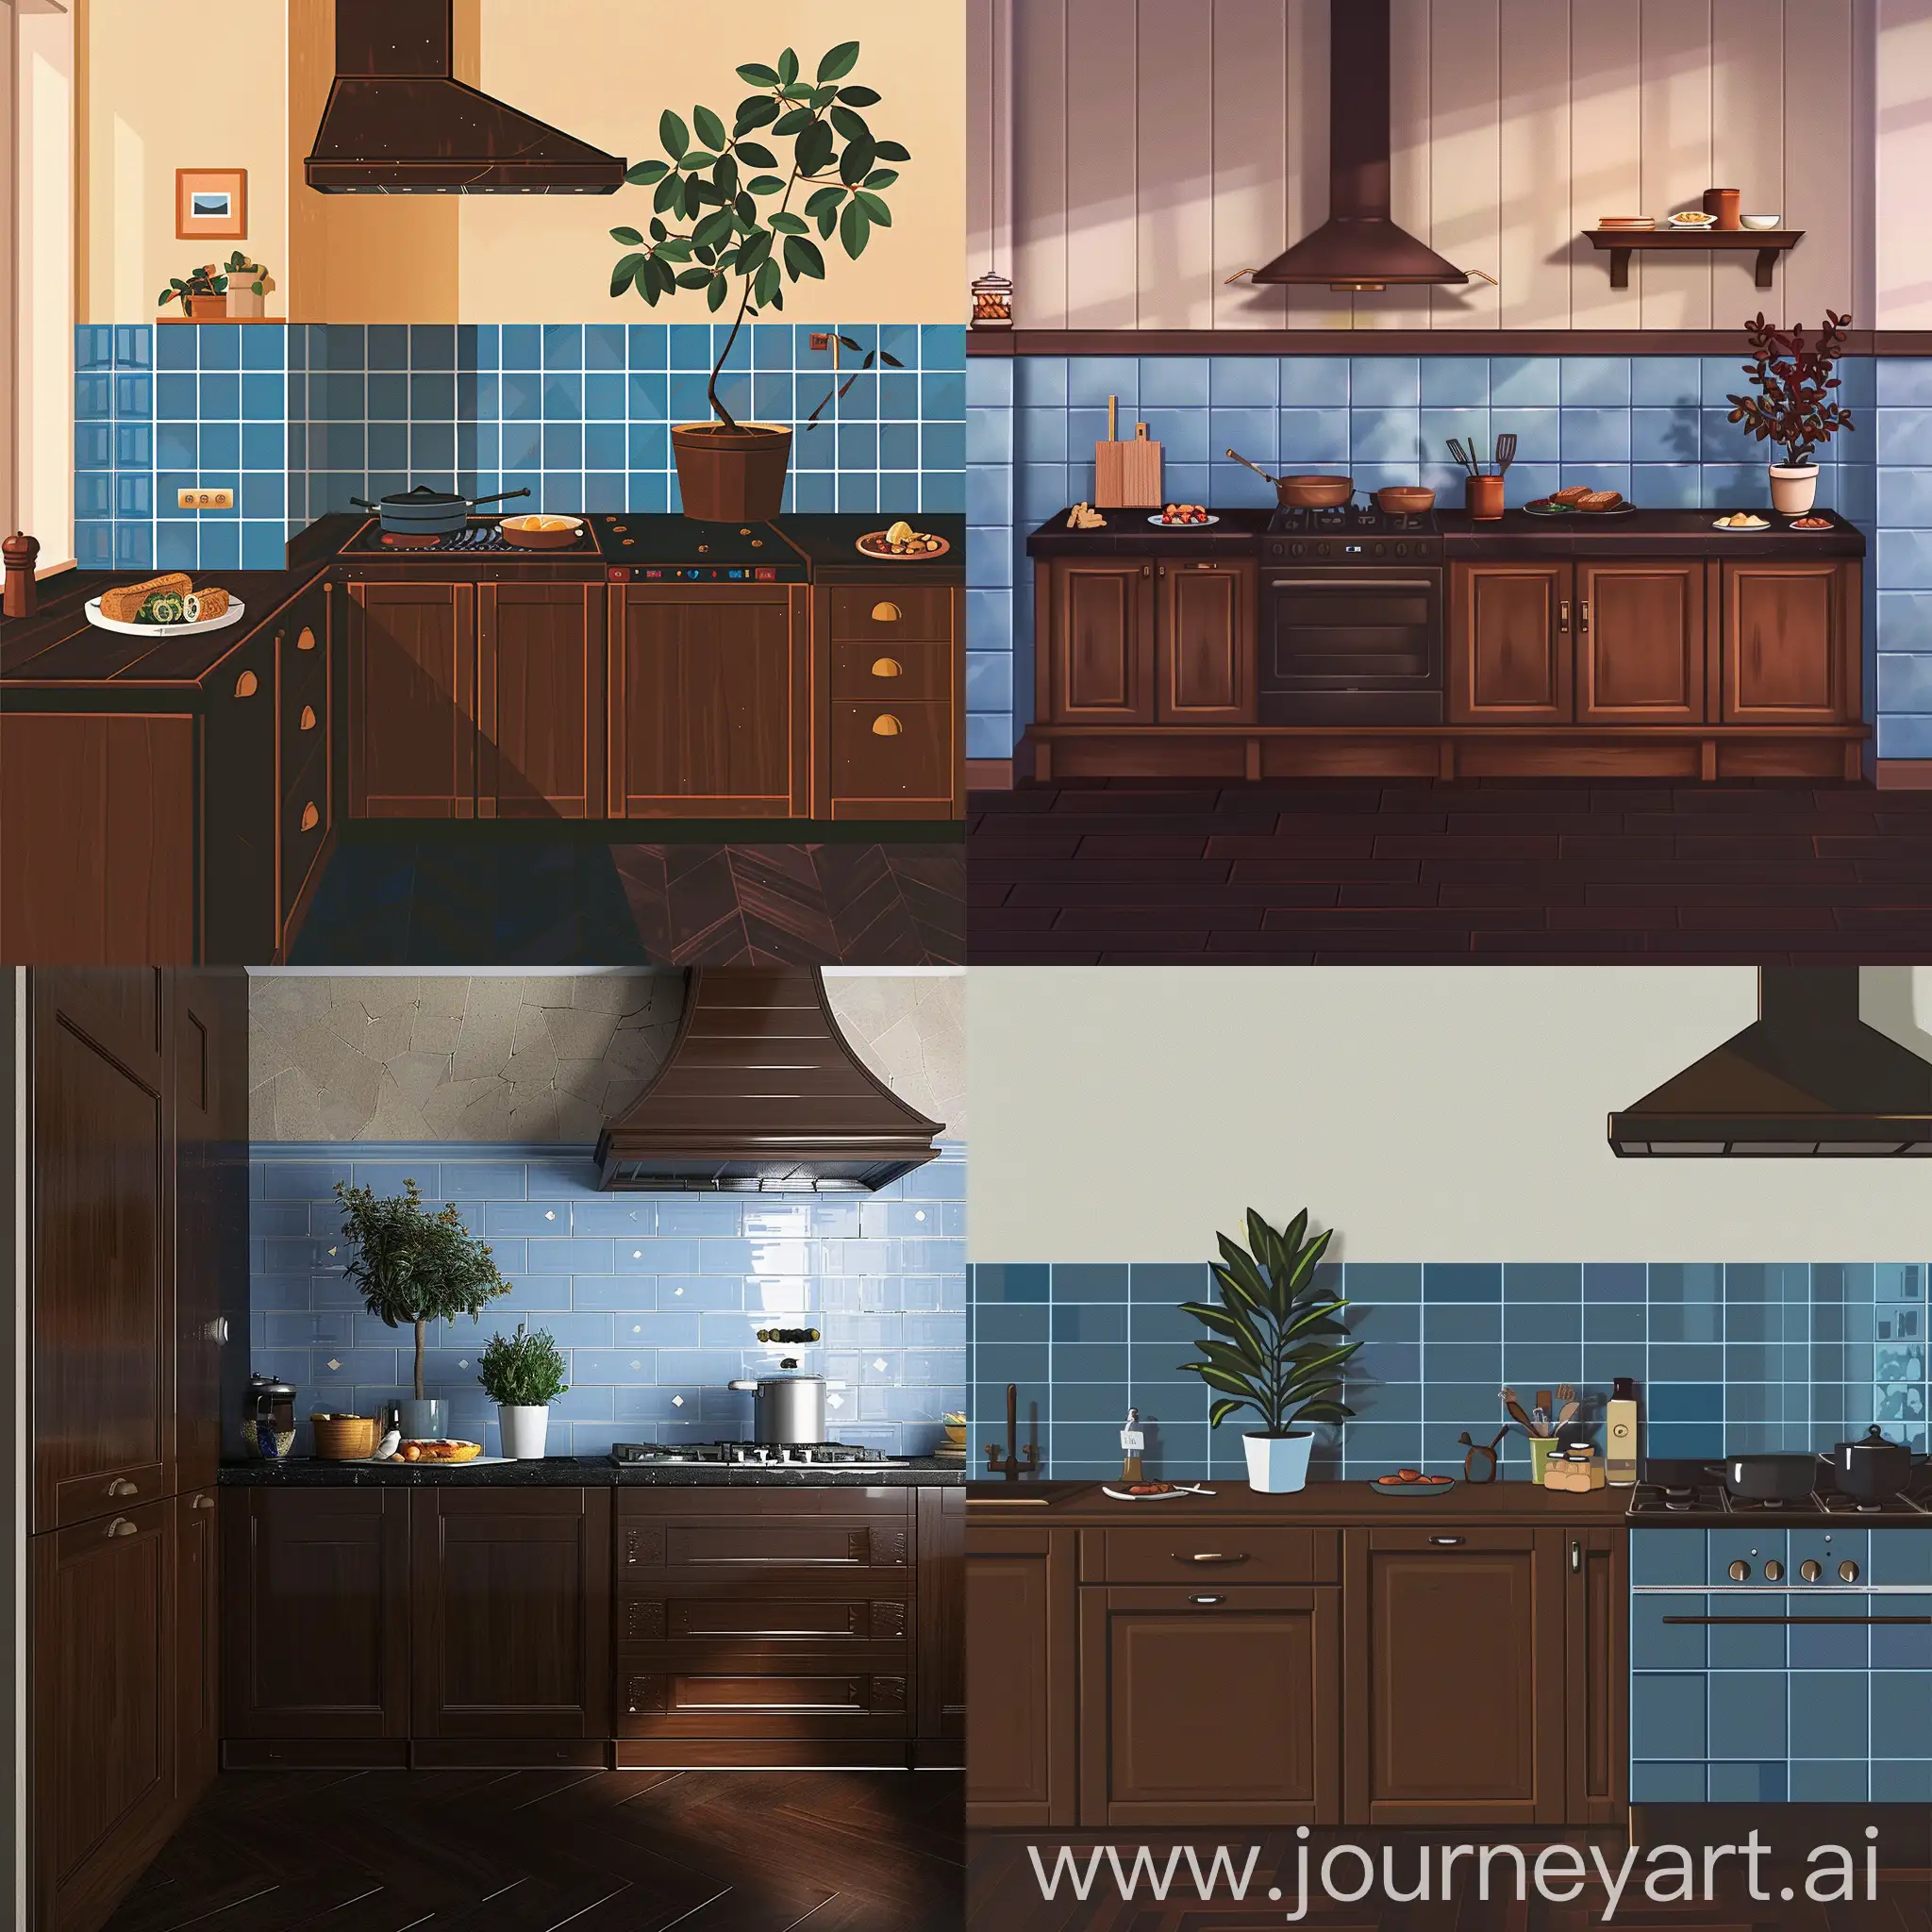 Scandinavian-Kitchen-Interior-with-Brown-Furniture-and-Blue-Tiles